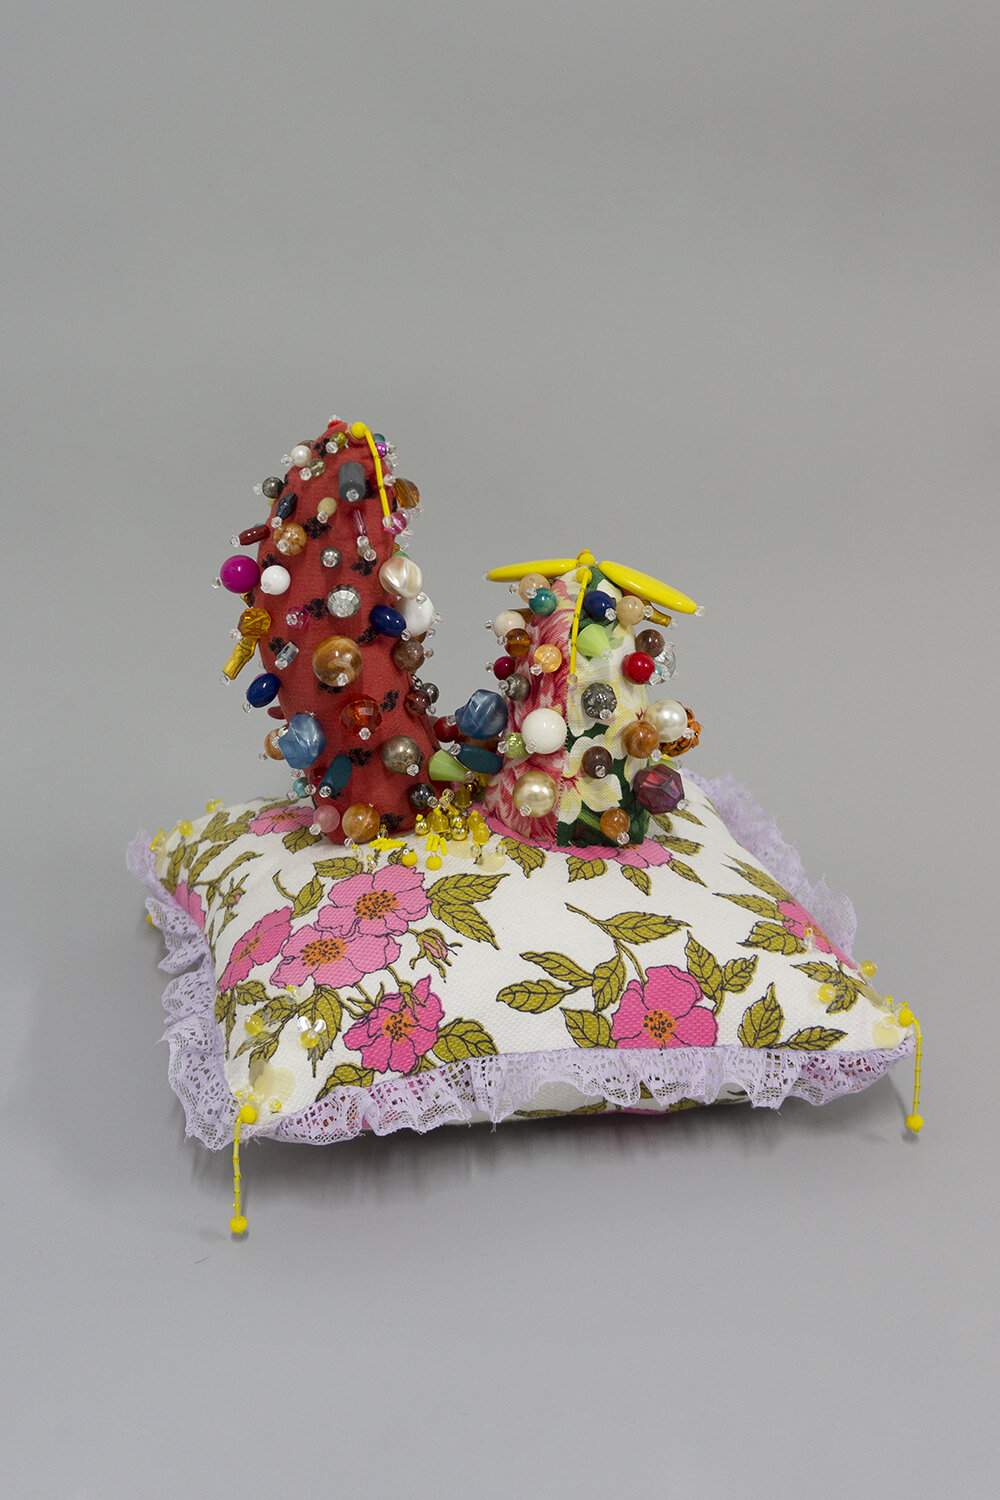   Sensitivity , 2018, Crystal, plastic, and wood beads, sequins, found fabric, trim, polyester batting, thread, 10.5 x 9.5 x 9.5” 